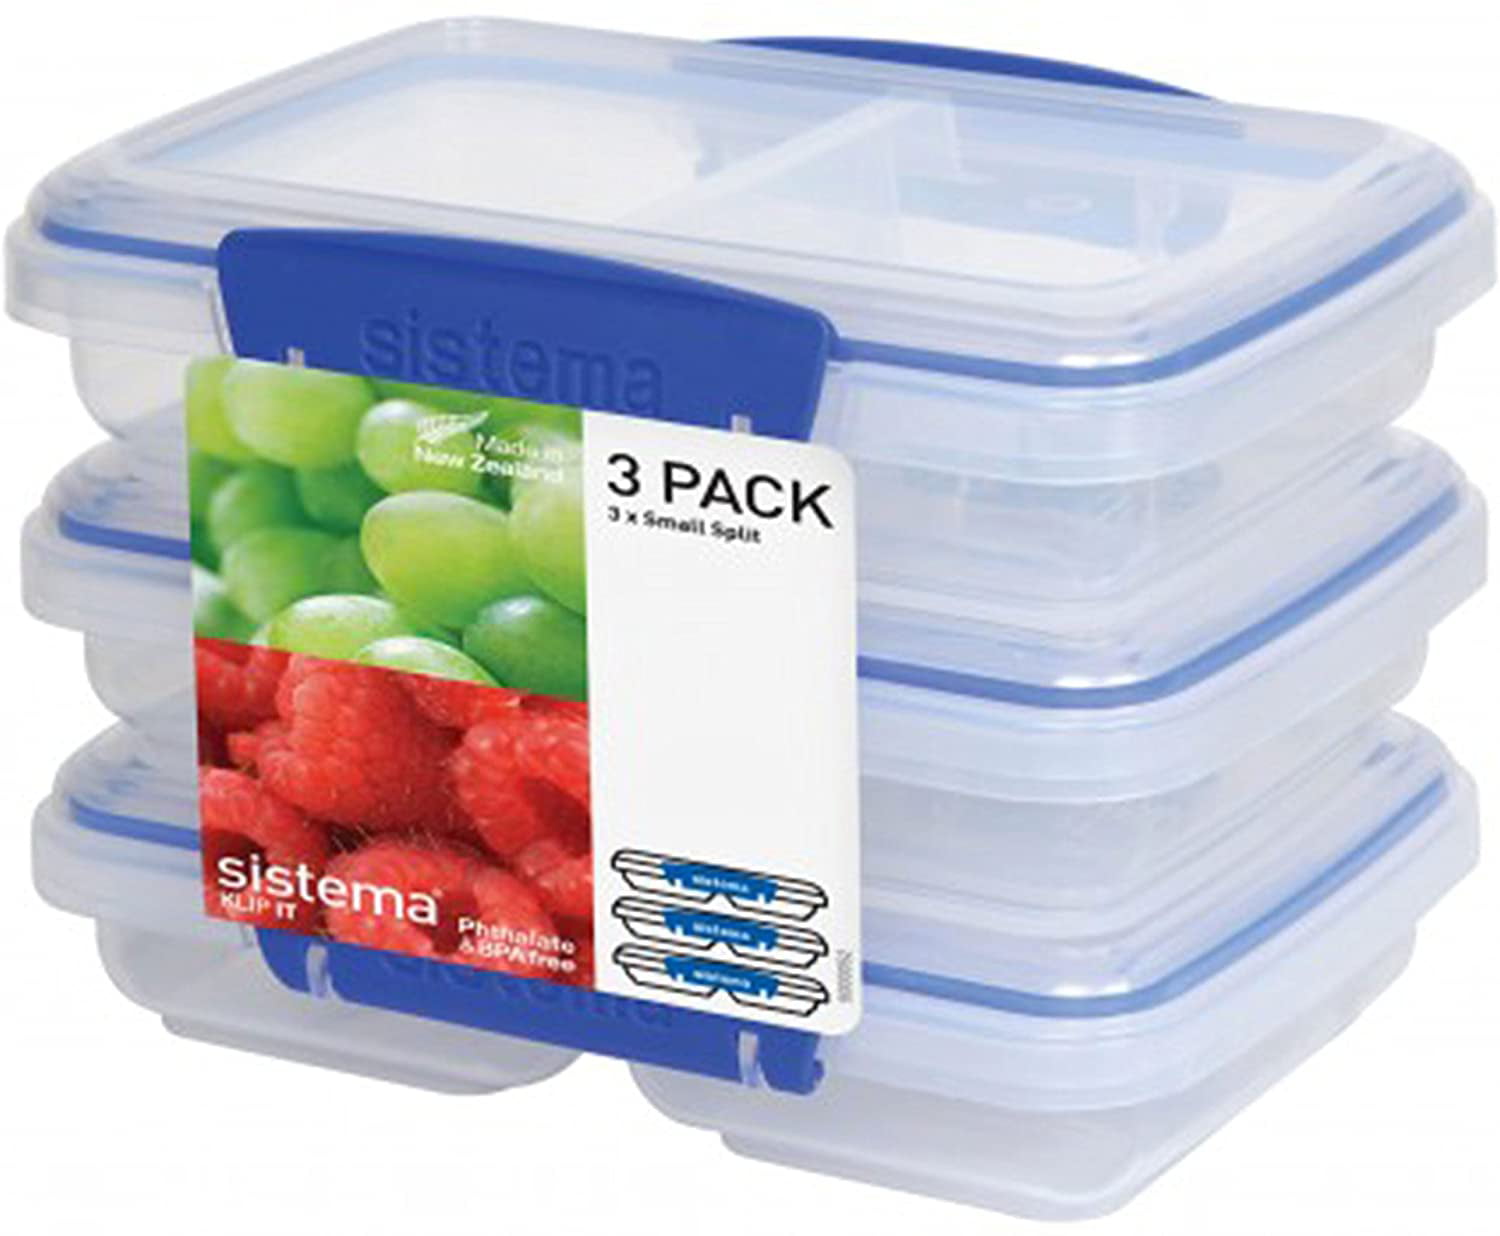 Space Design Set of 3 Plastic Lunch Boxes 